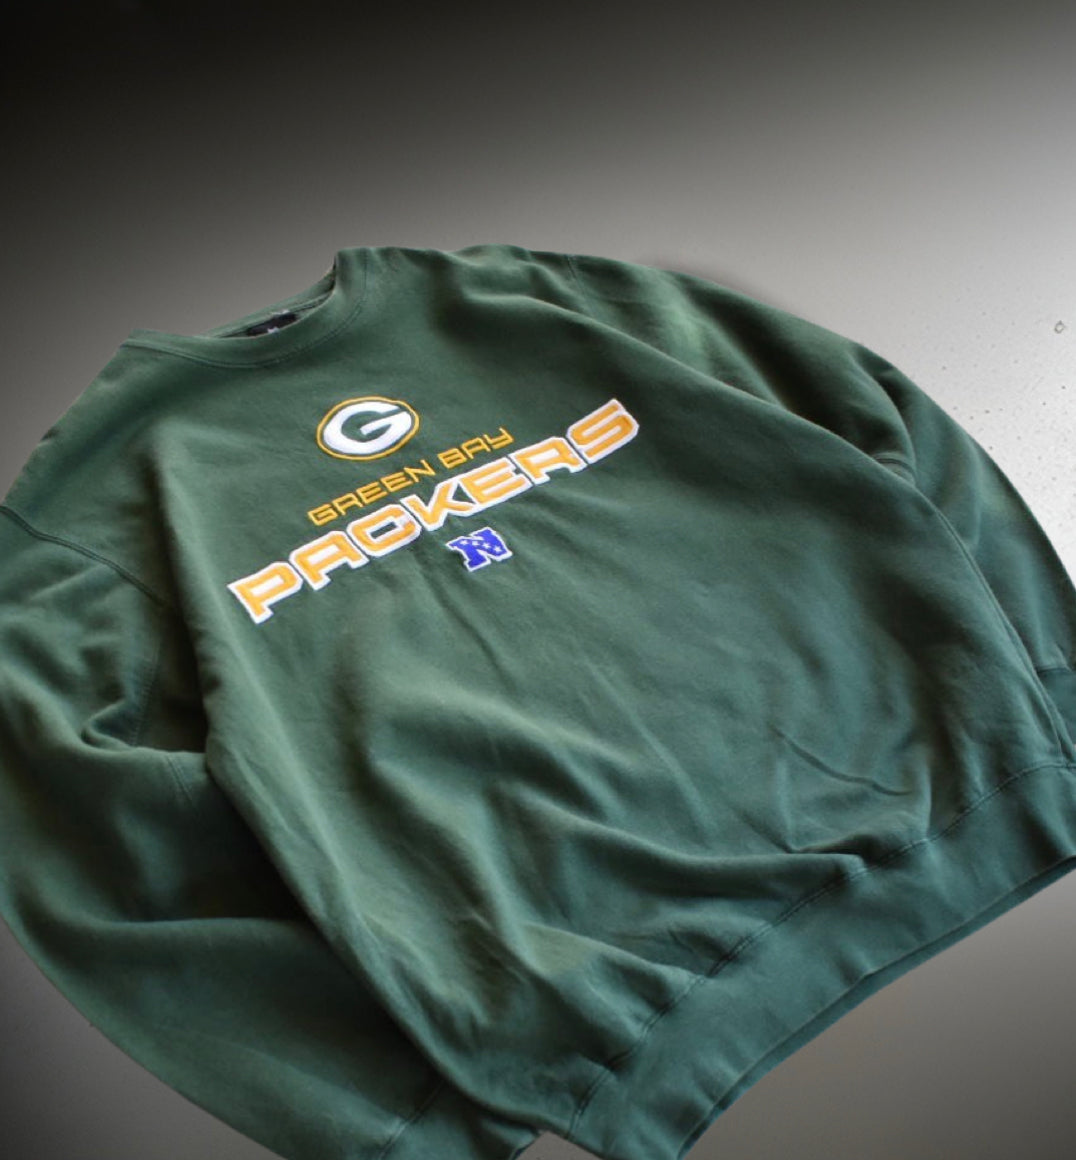 Green Bay Packers Spell Out Logo Crewneck Sweater (M)